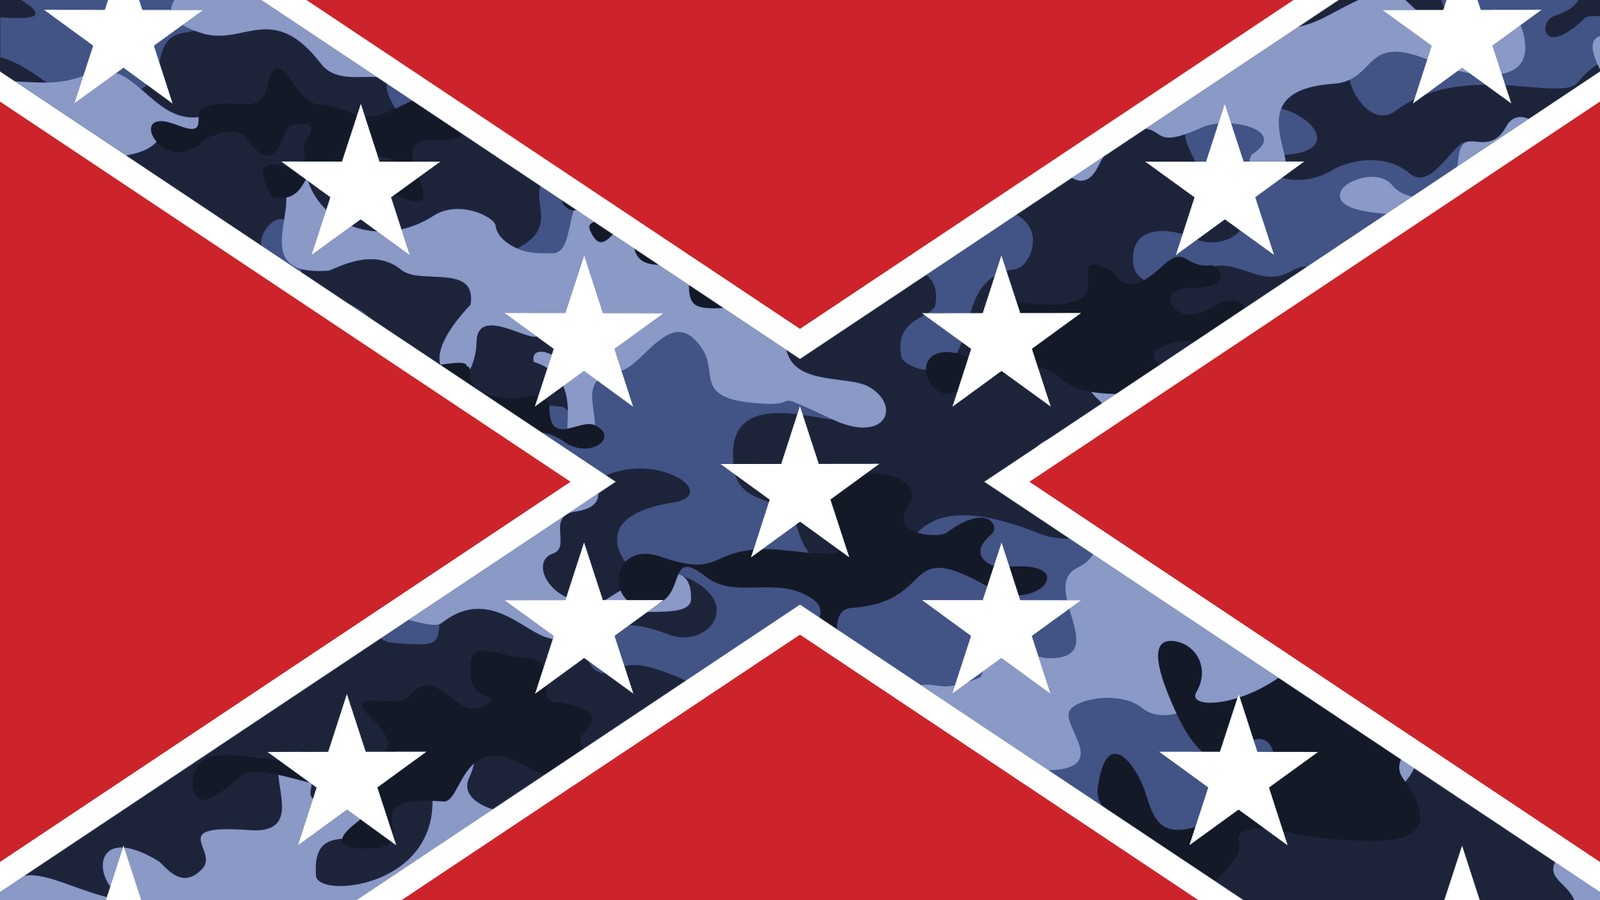 How the U.S. Military Came to Embrace the Confederate Flag - The Atlantic